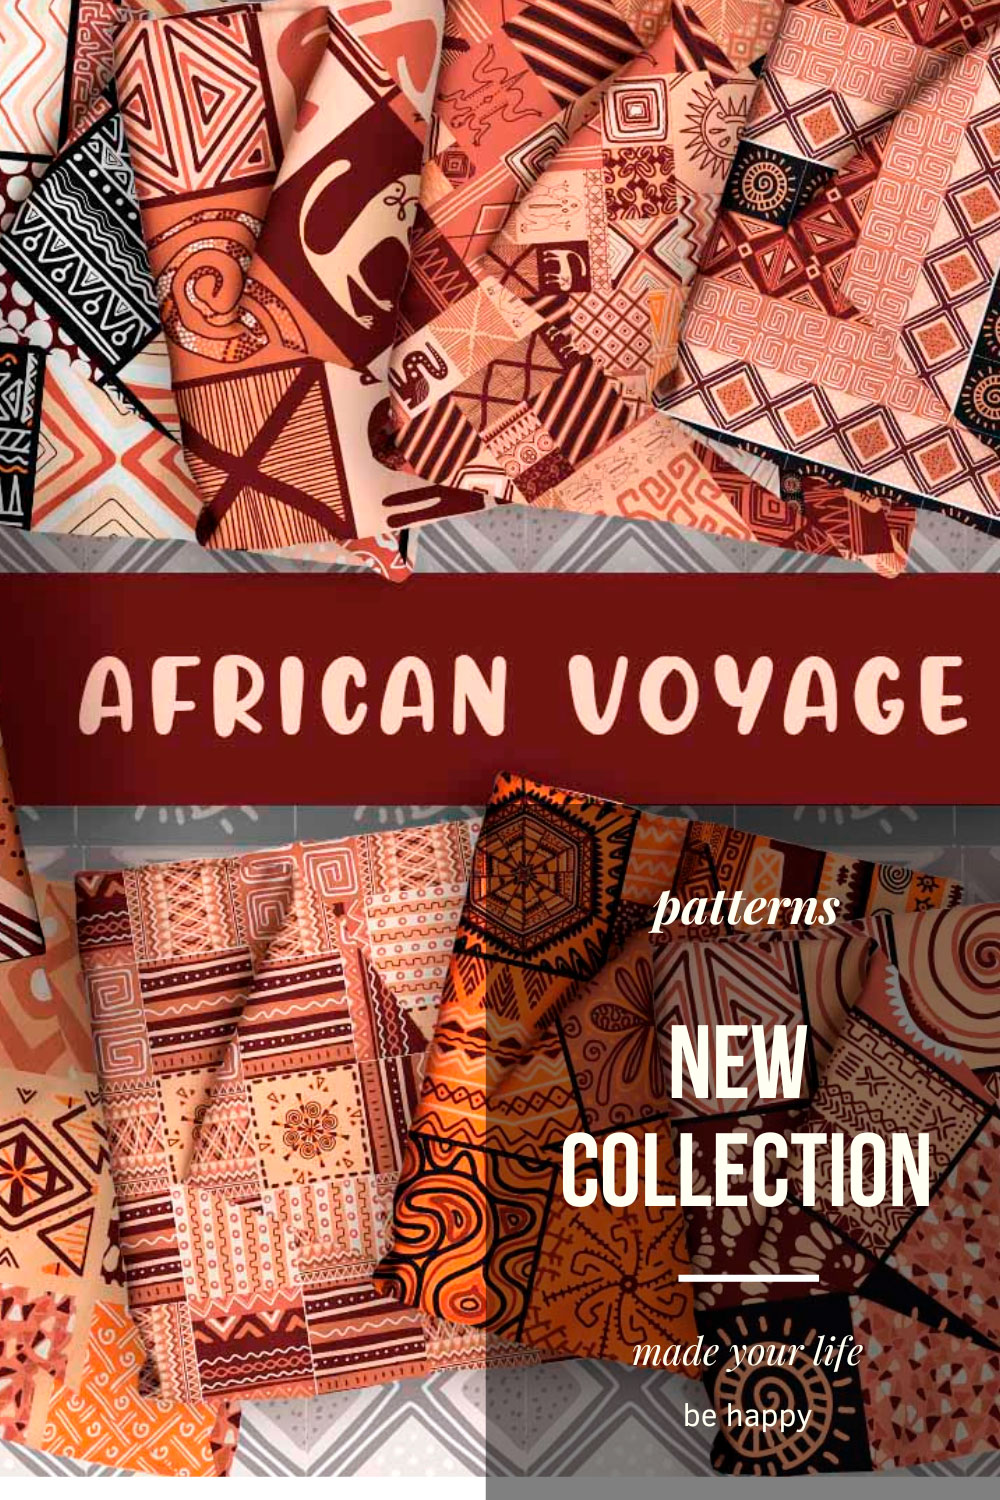 A Pack of Exquisite Images of African Style Patterns.